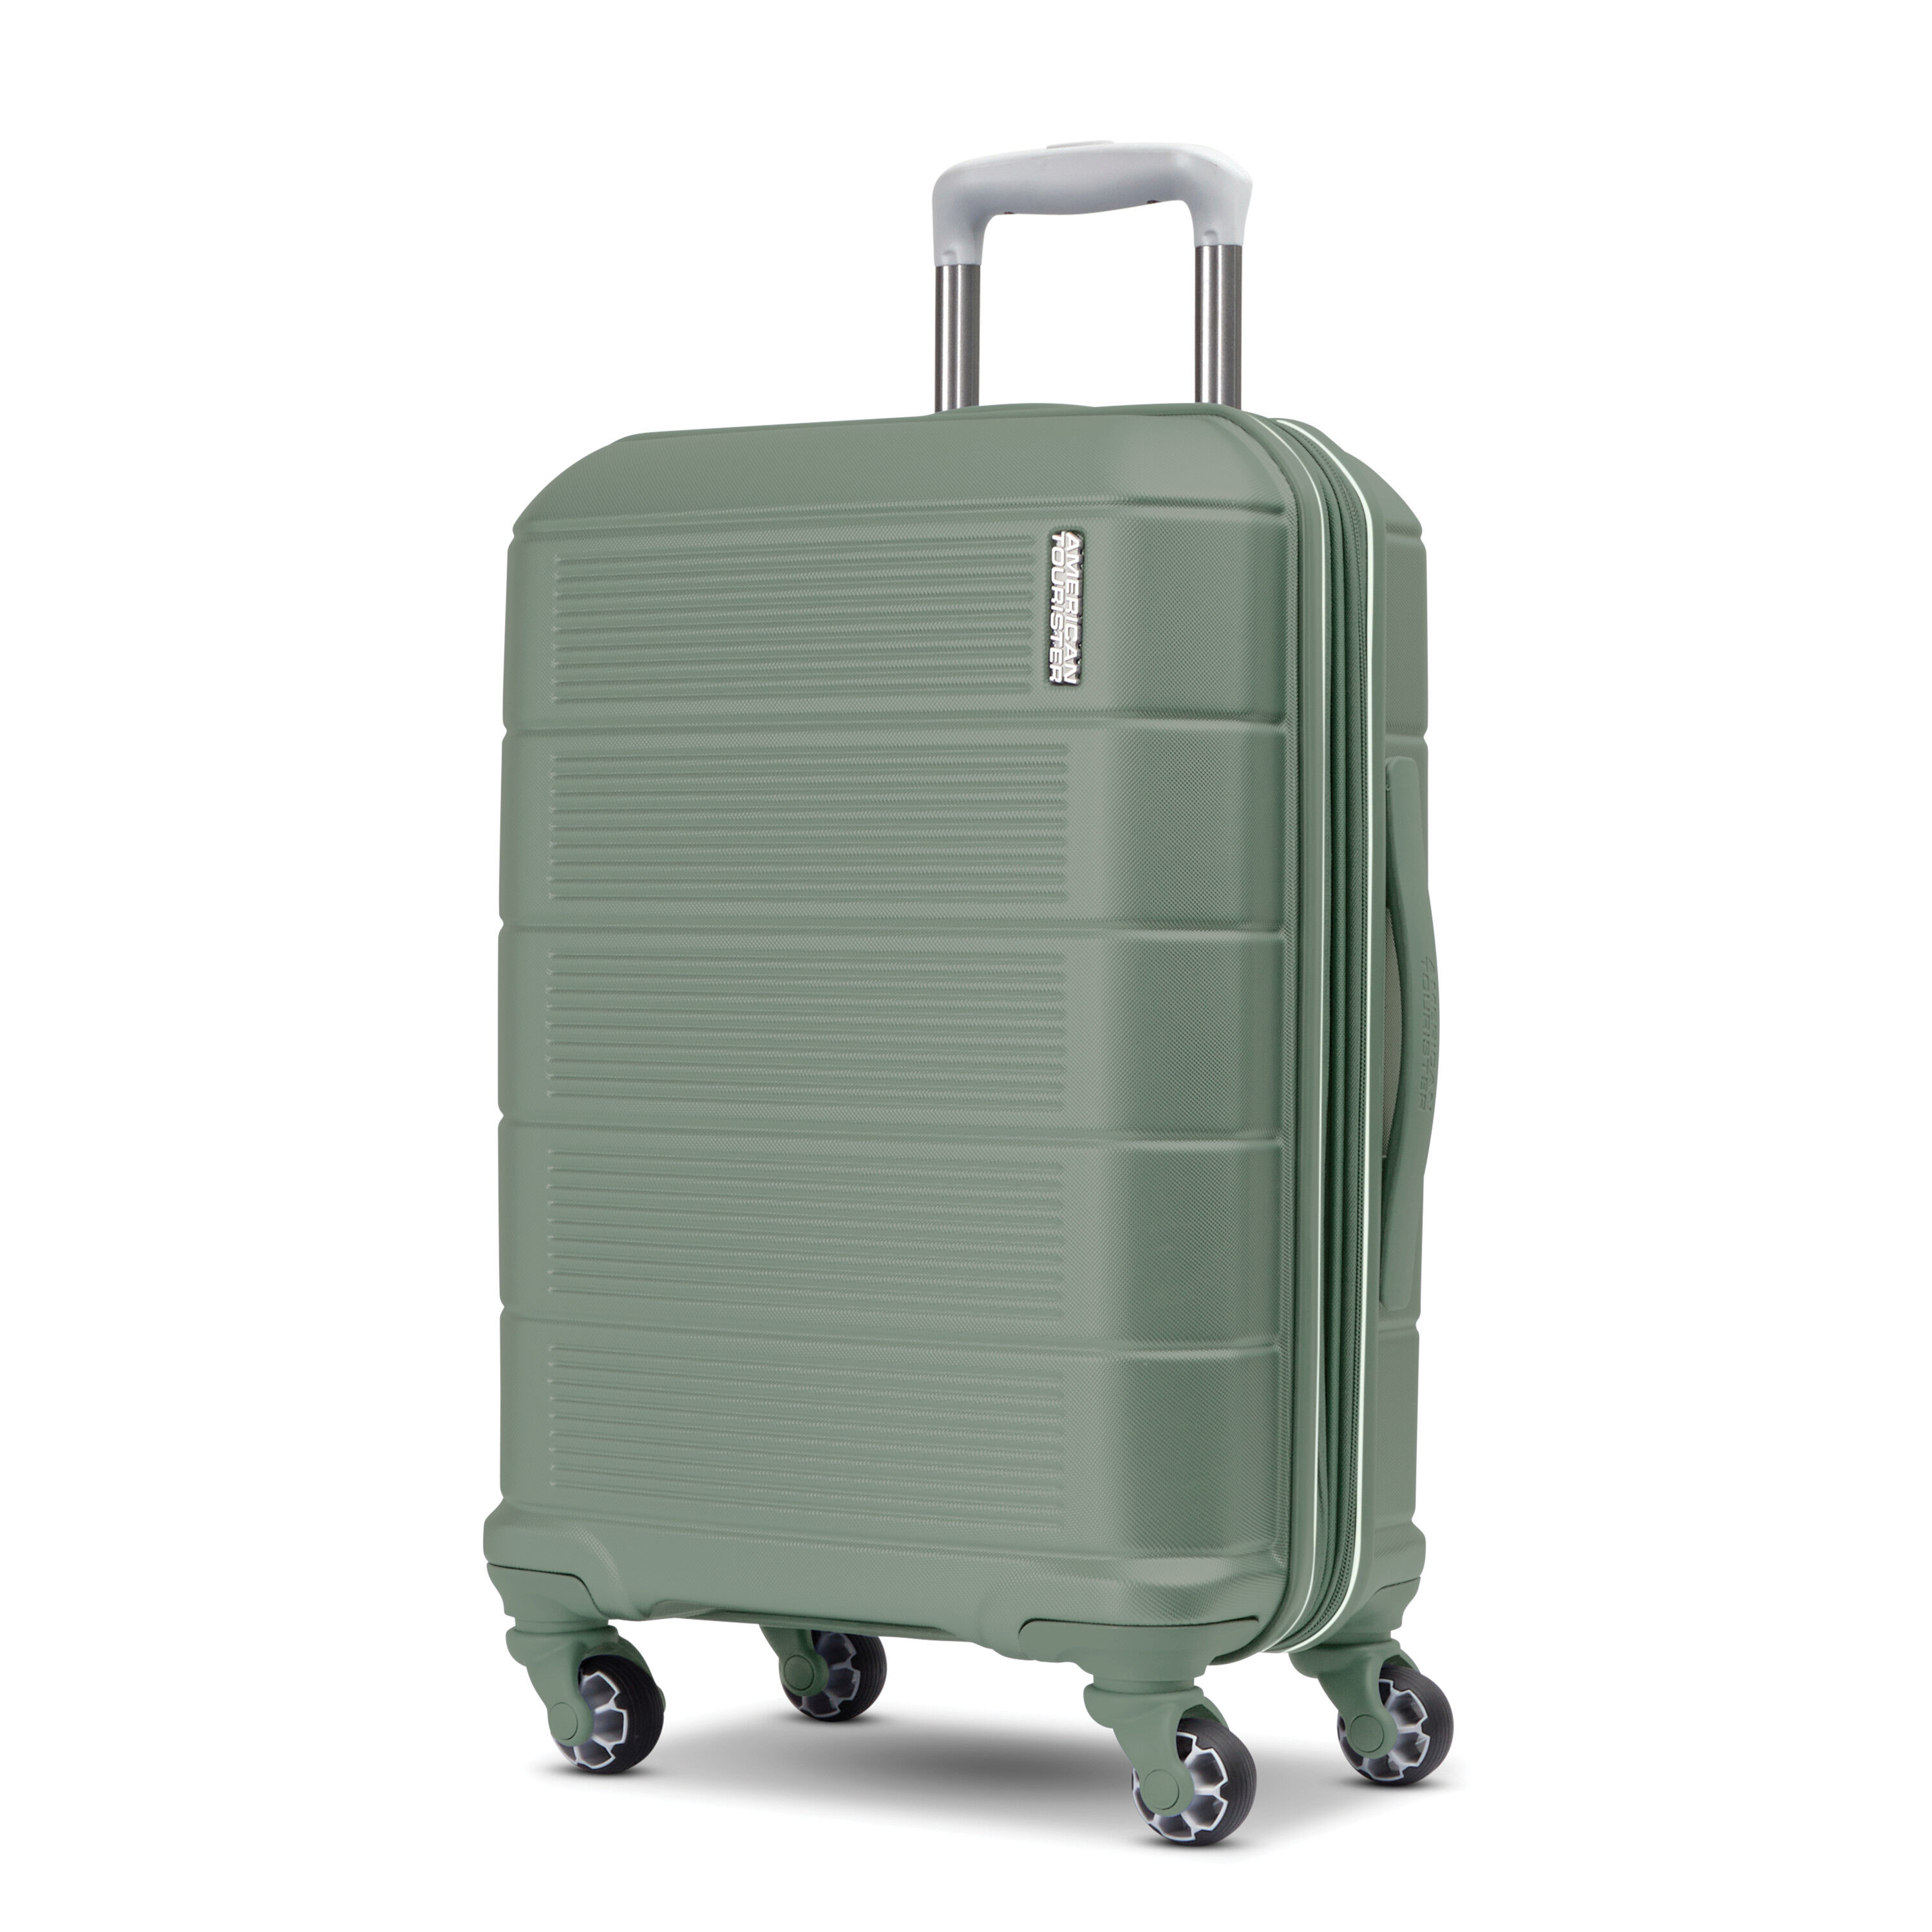 Castle Carra: STYLE HISTORY: AMERICAN TOURISTER RE-INVENTS LUGGAGE